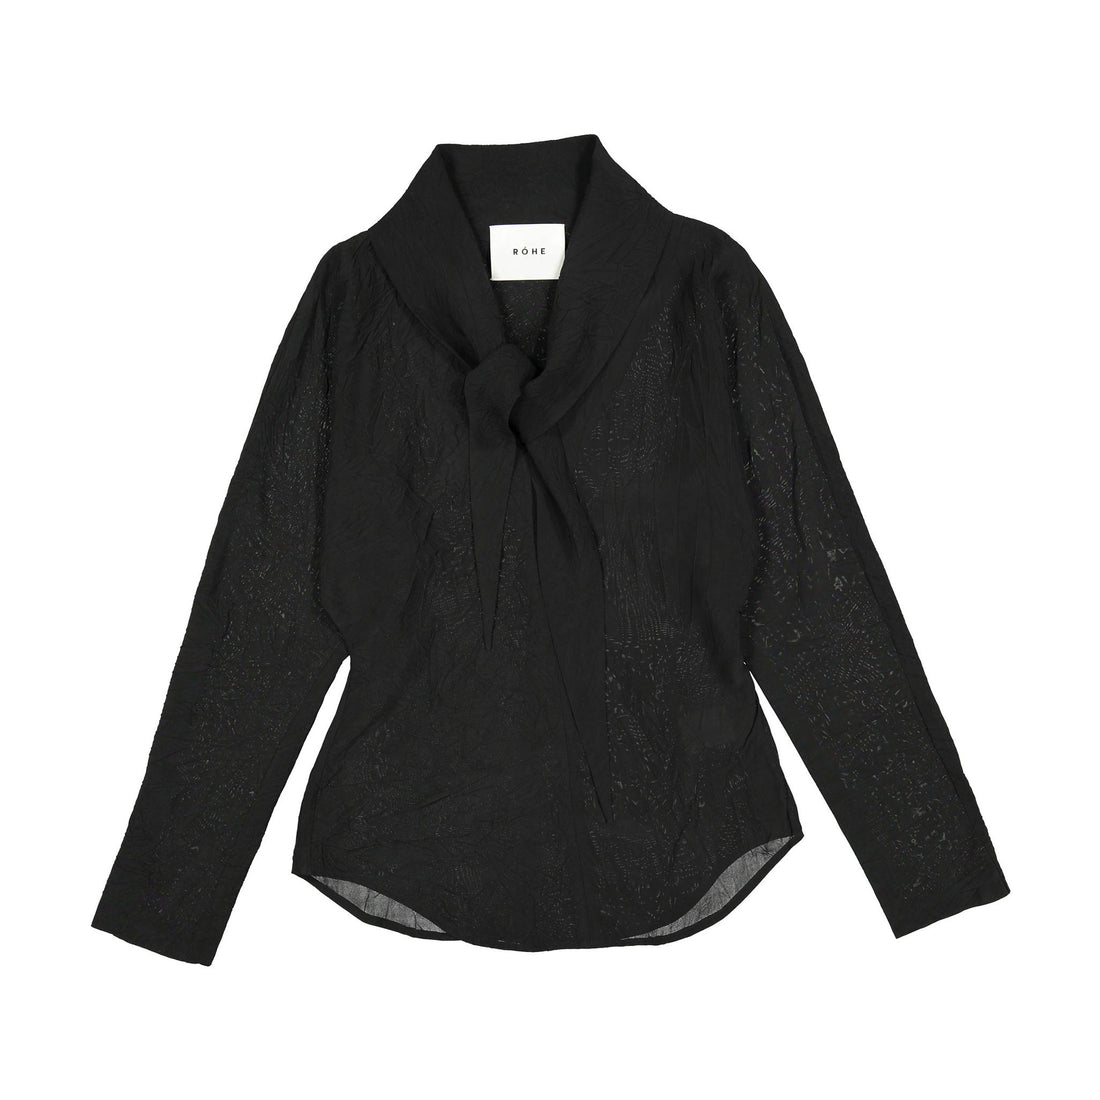 Rohe Black Crushed Scarf Top